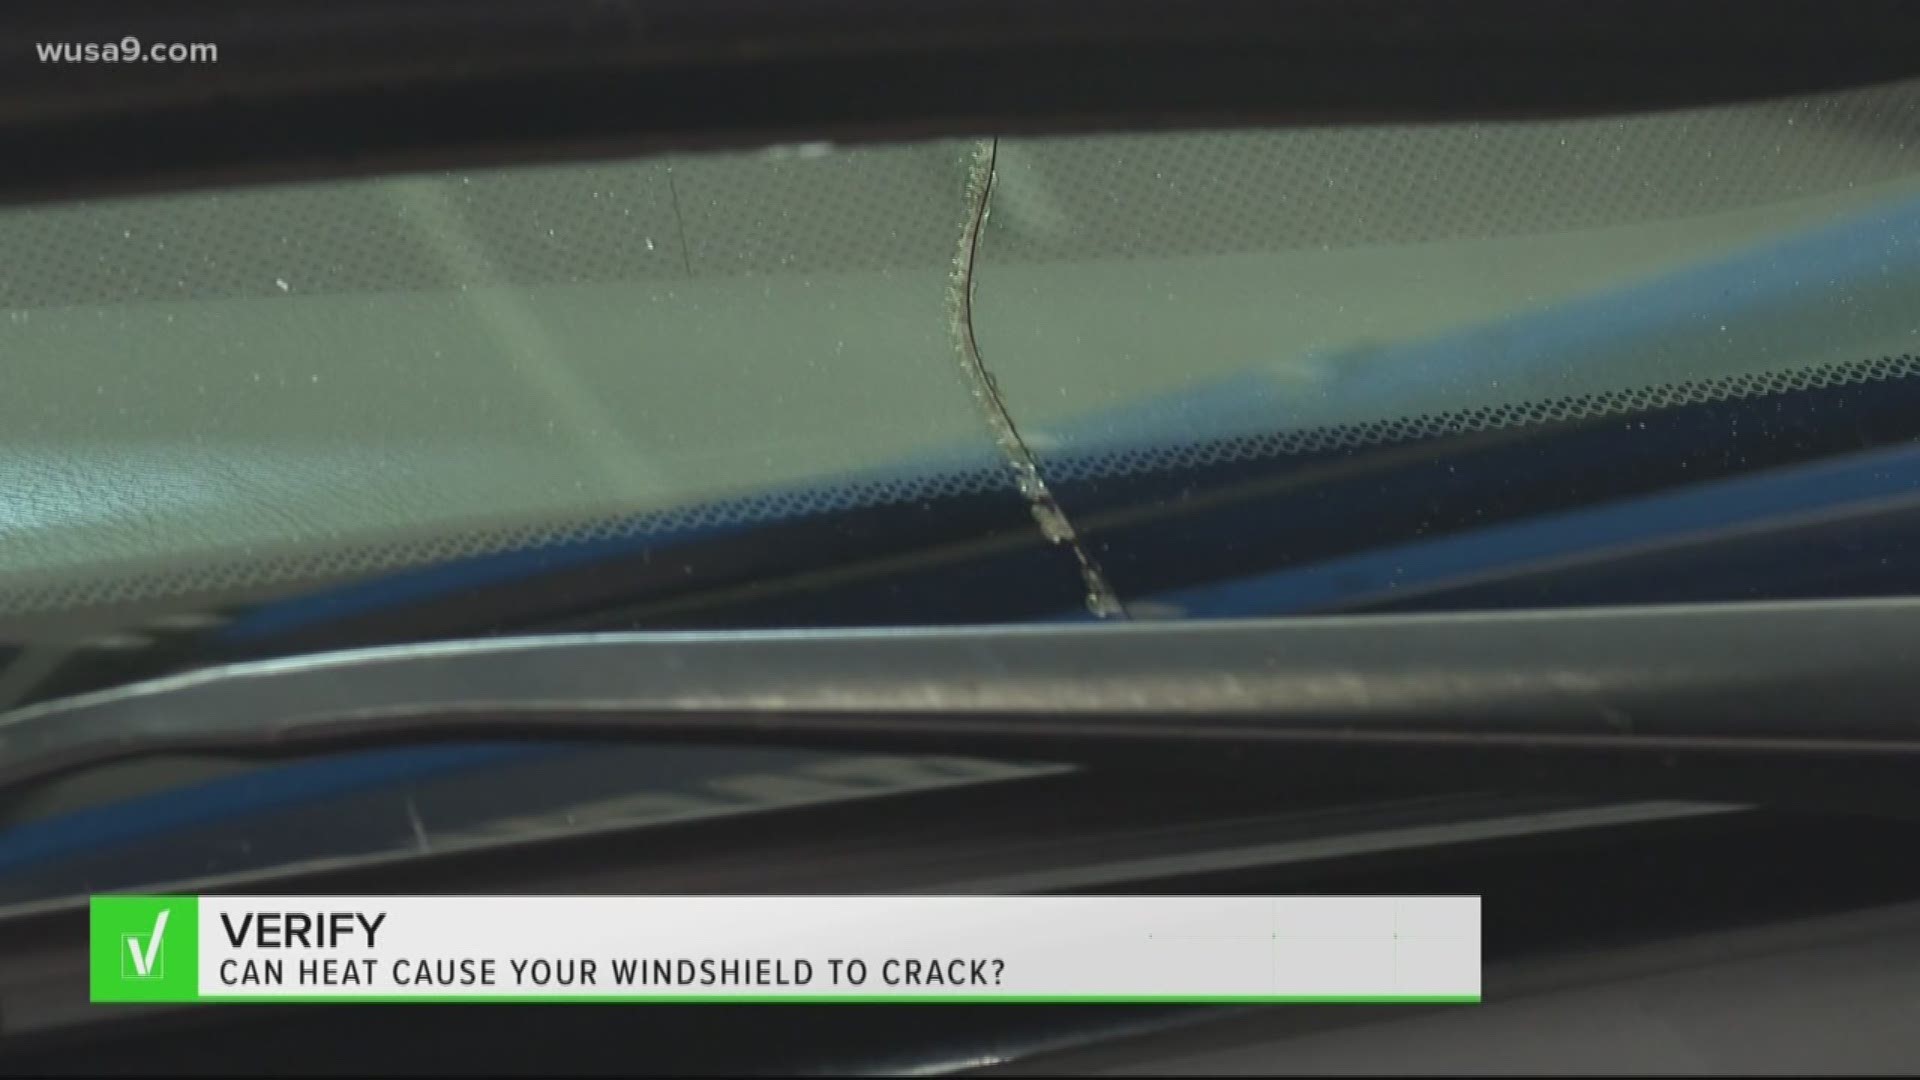 If your windshield is already cracked, the heat can definitely make it worse.